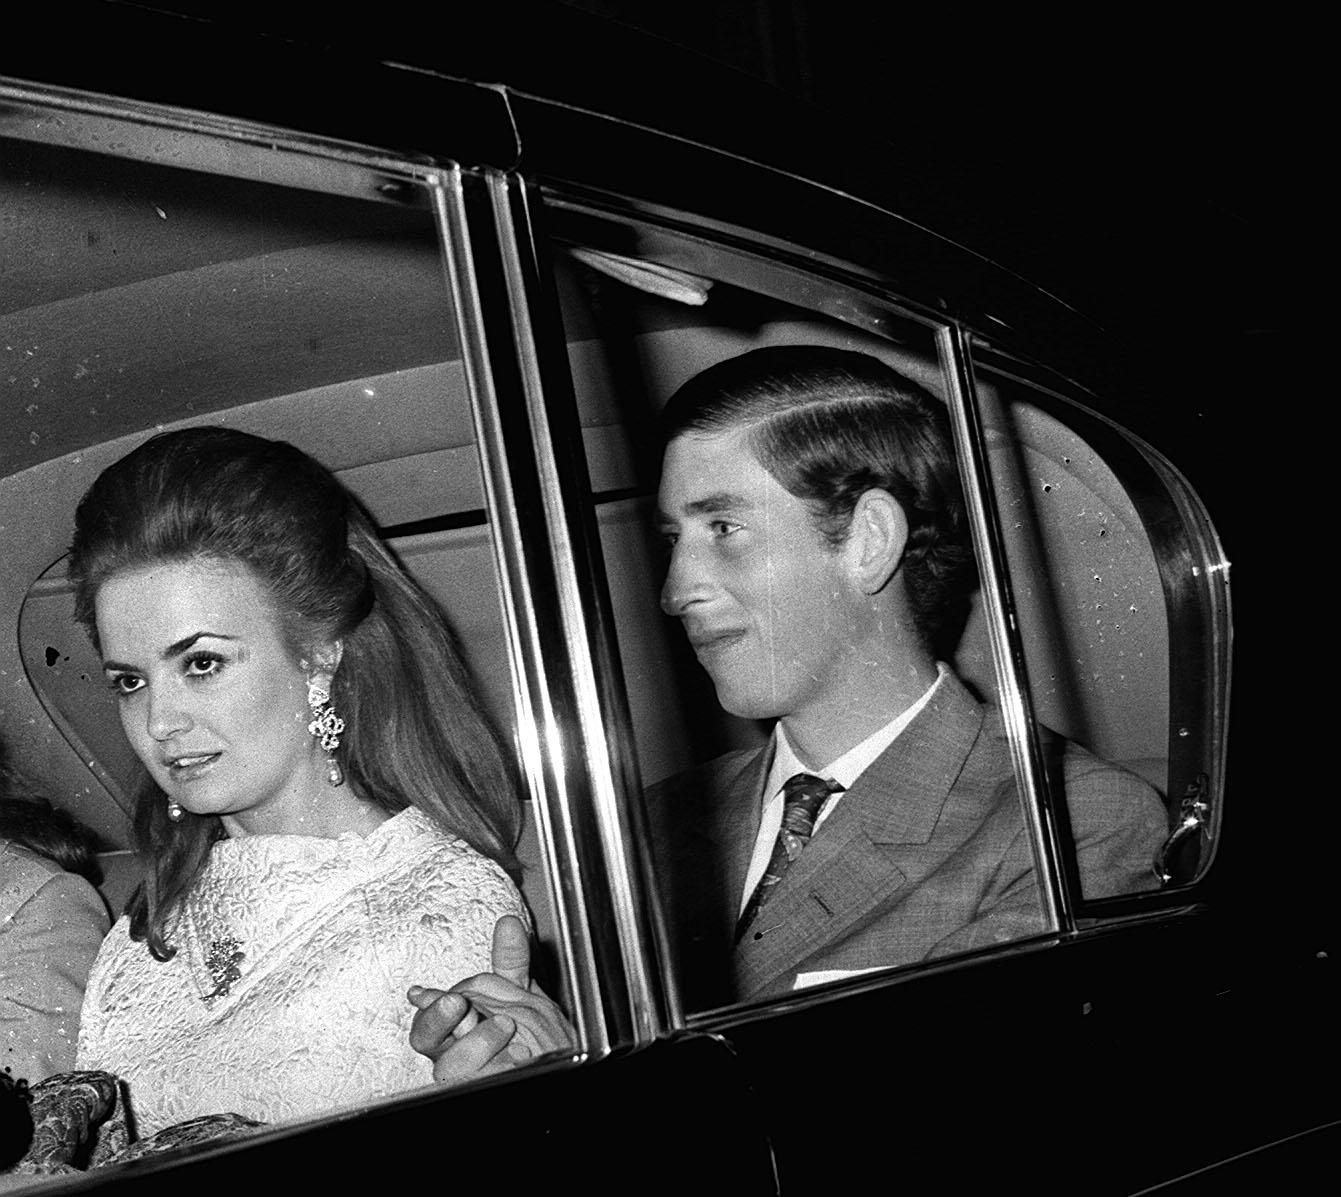 Prince Charles and Lucia Santa Cruz leaving the fortune Theatre, London, after attending a performance of David Storey's play "The Contractor" on April 16, 1970 | Source: Getty Images